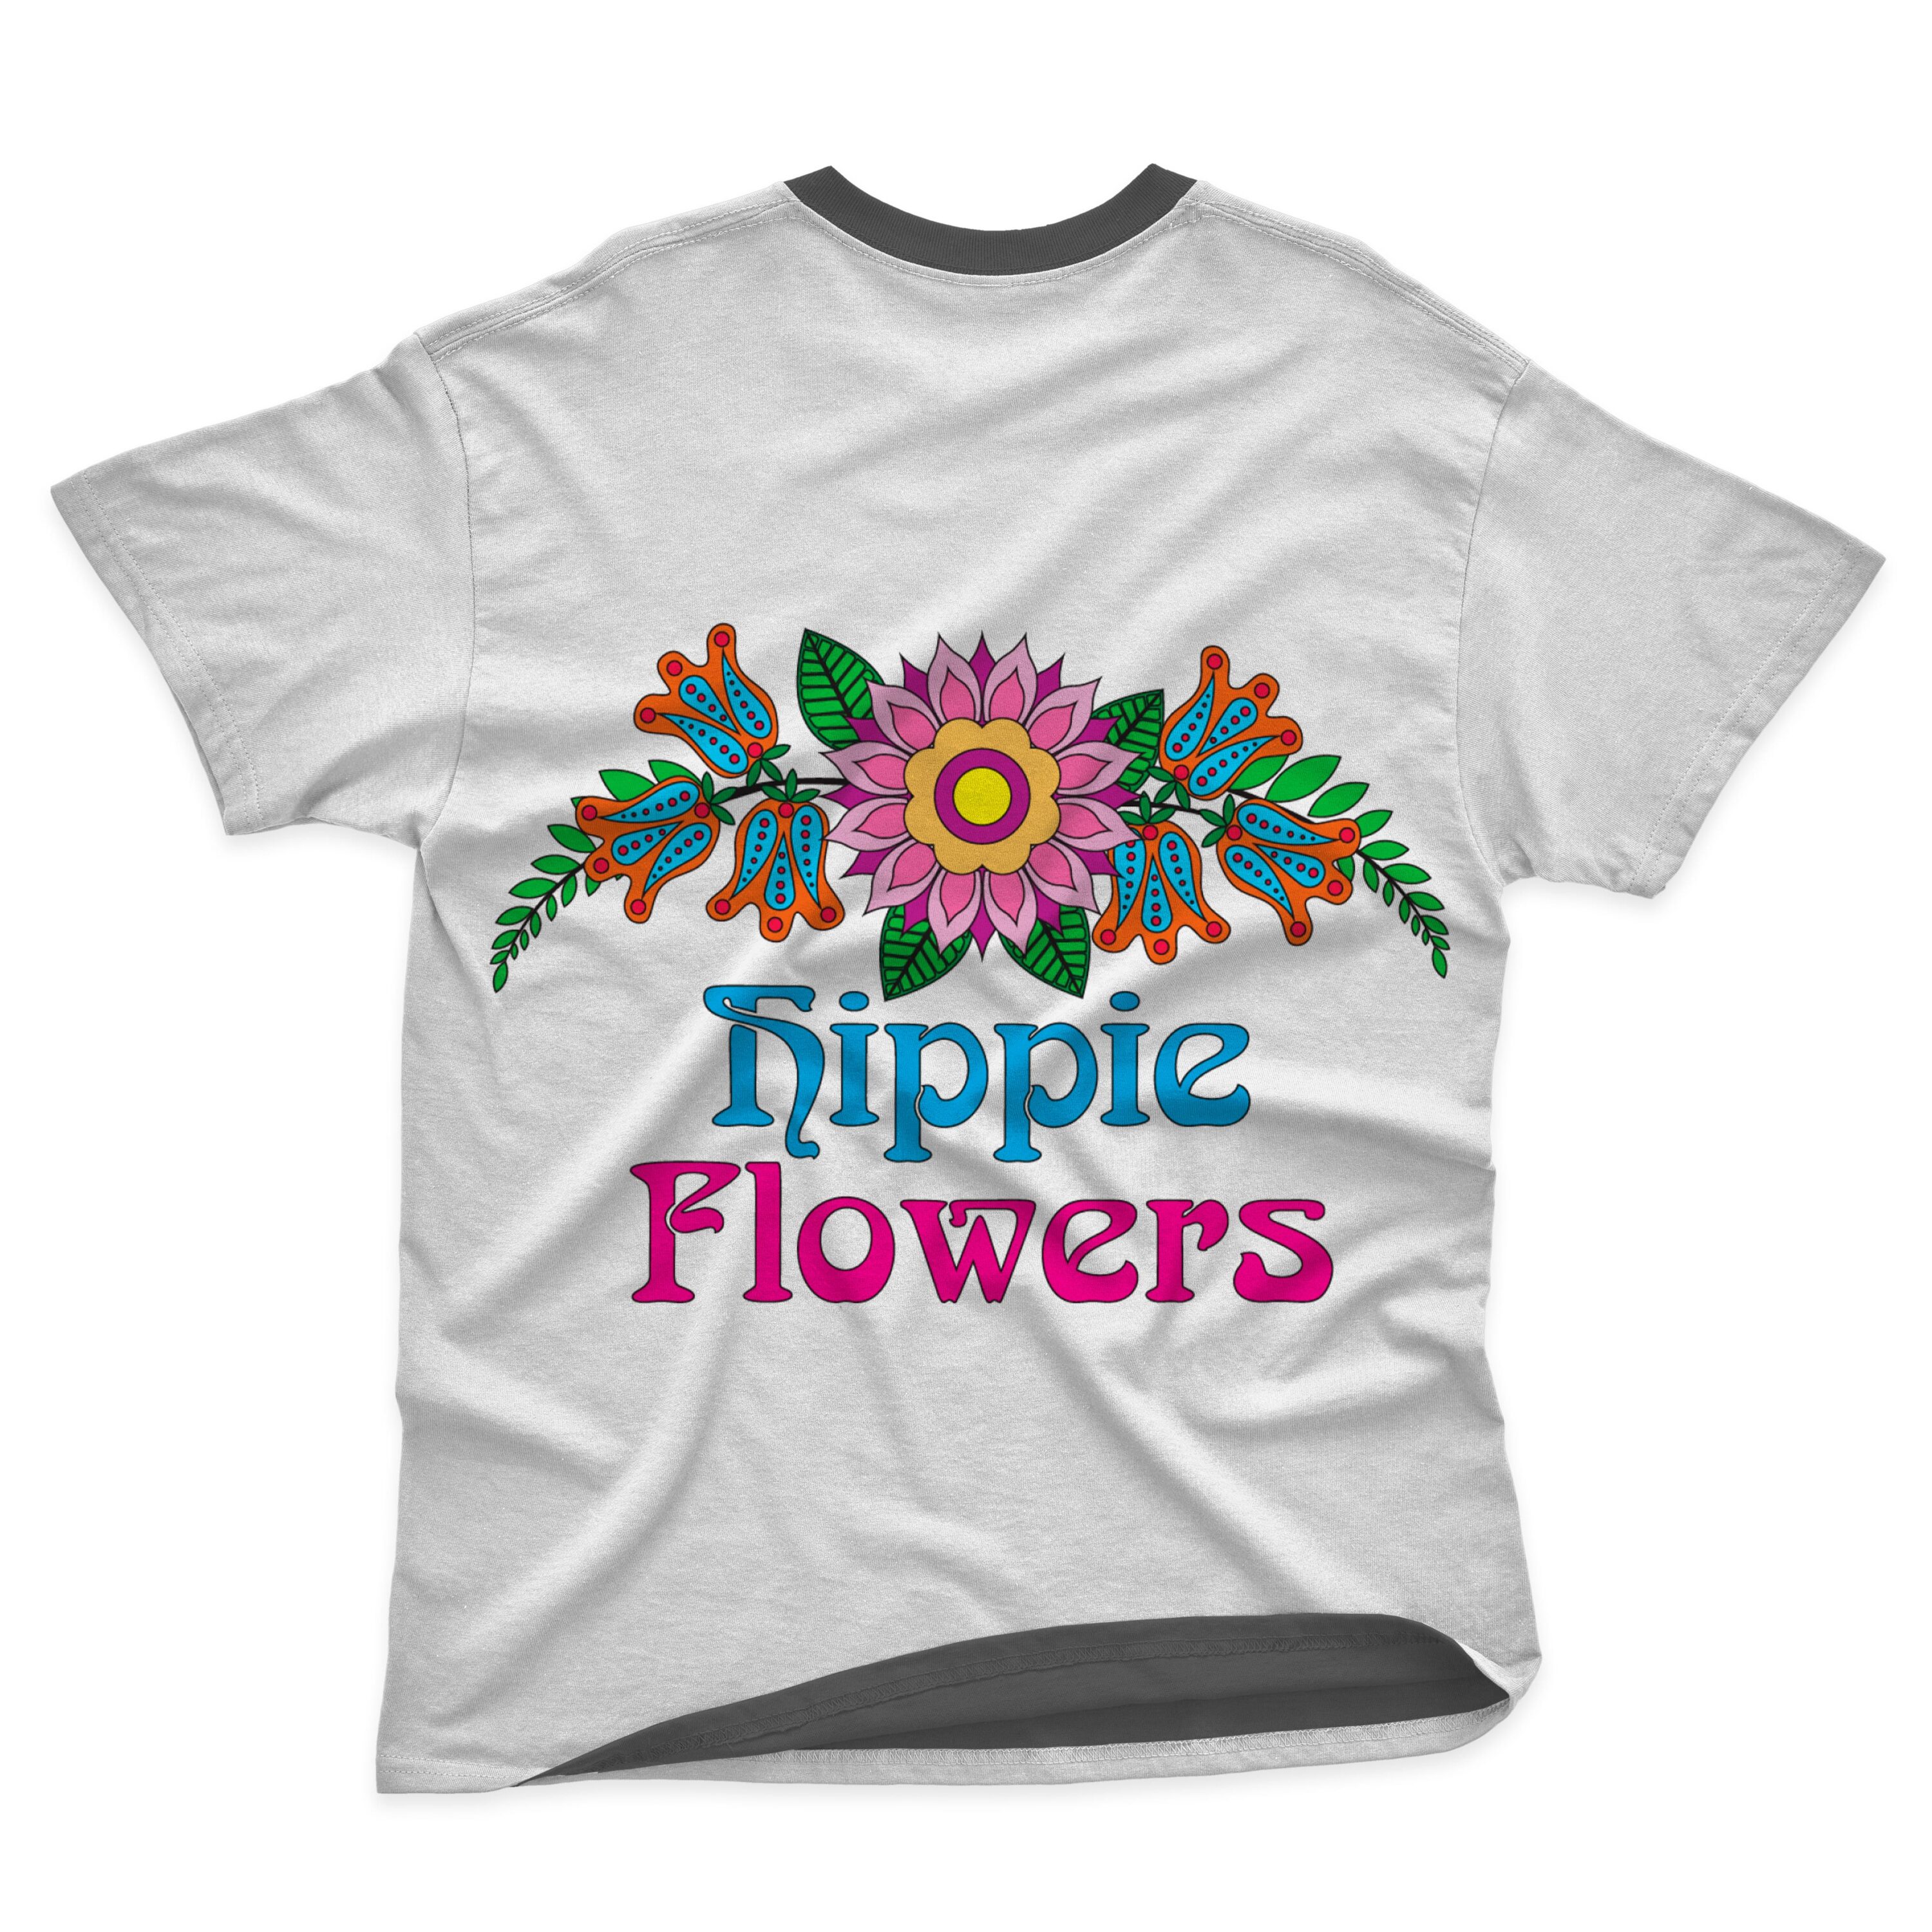 Add some hippie vibes to your designs.